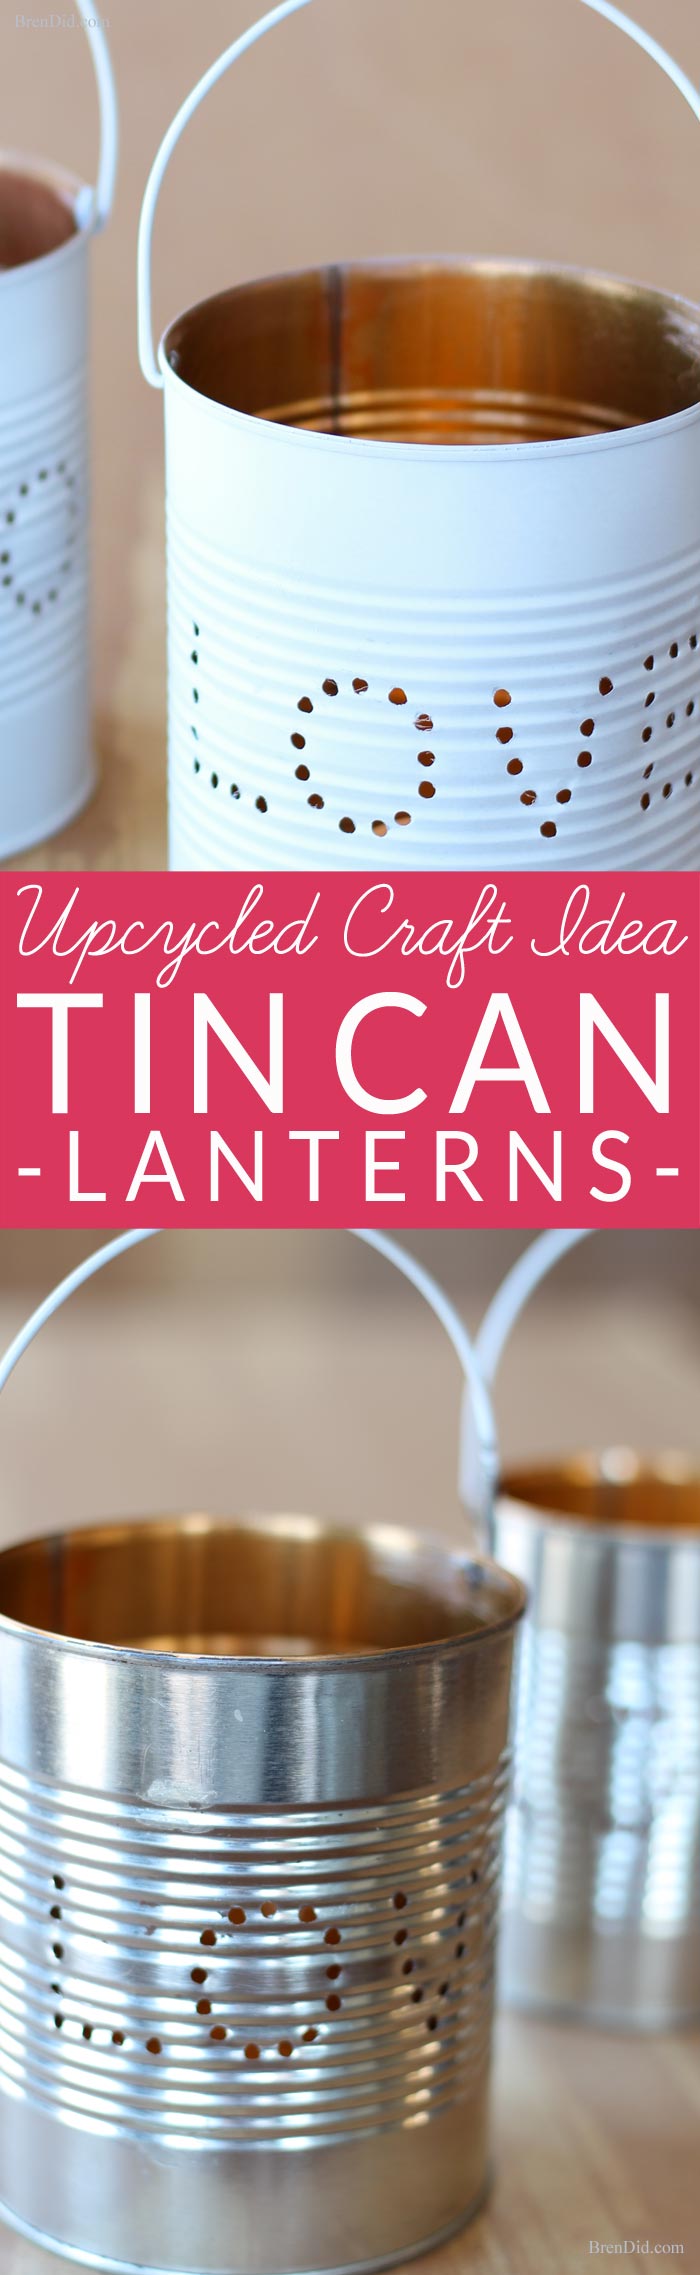 Upcycled Craft Ideas for Valentines Day. Learn how to make an adorable tin lantern from an upcycled tin can! These easy DIY lanterns are made from just two recycled craft supplies: a tin can and a wire coat hanger. Perfect for rustic wedding, Valentines Day or a romantic décor. The Art Of Up-Cycling: repurposed tin cans to lanterns. 